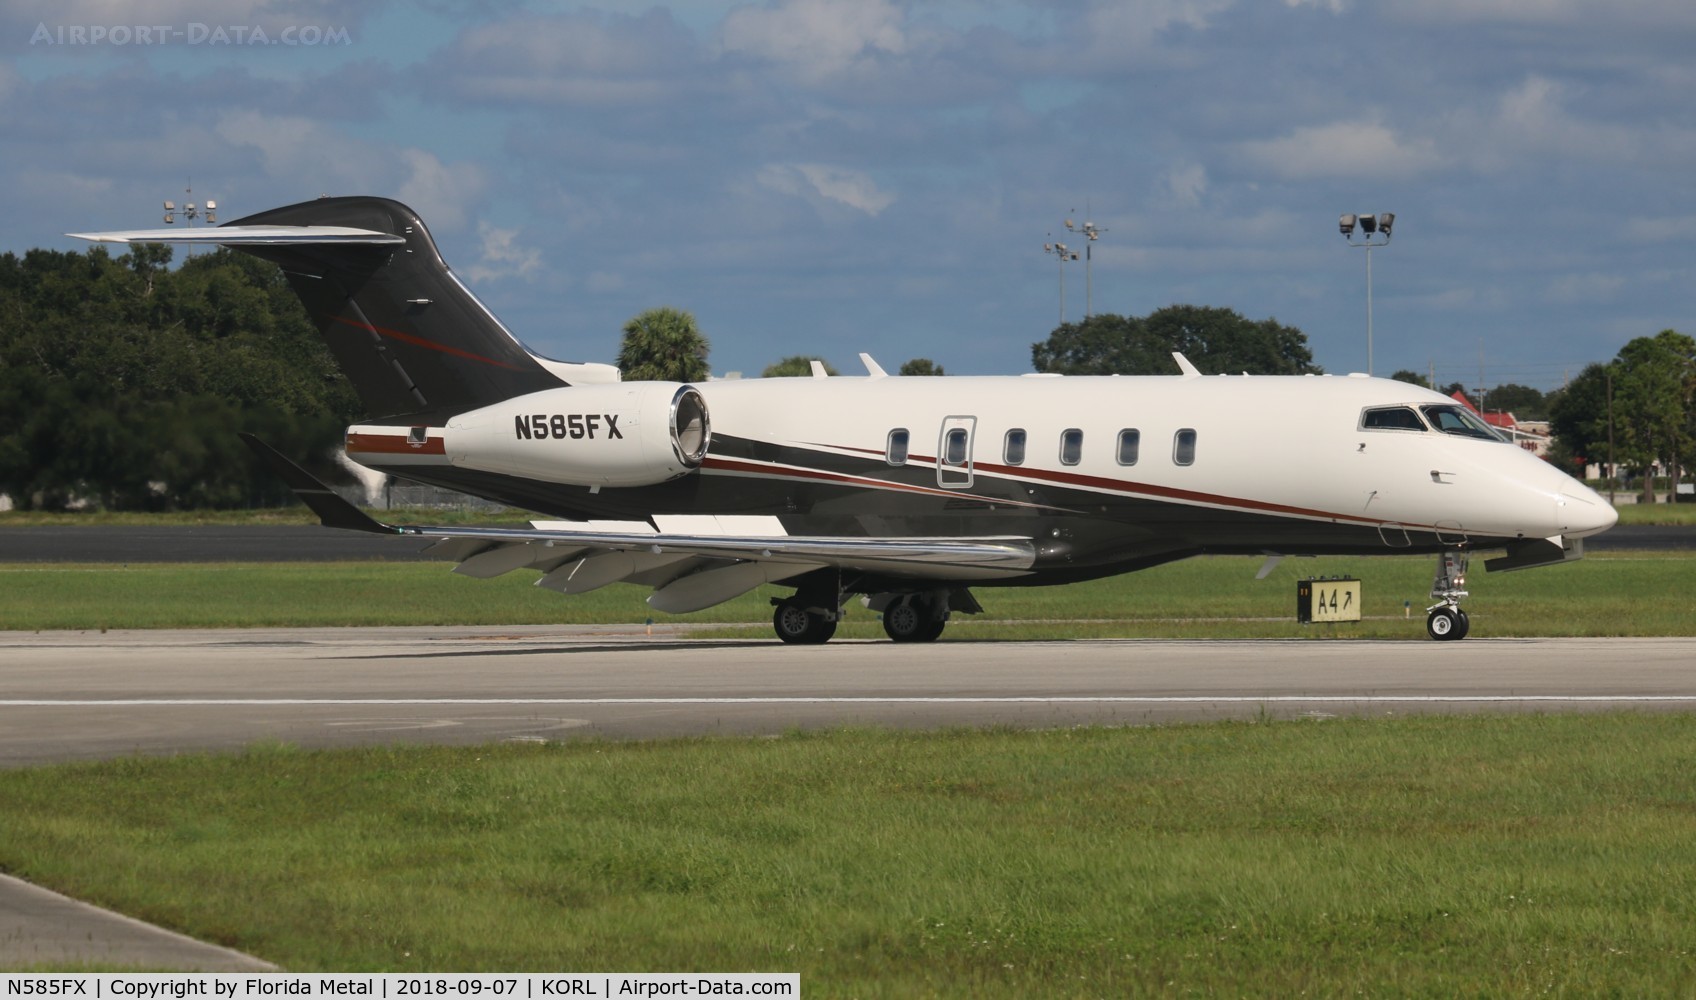 N585FX, 2017 Bombardier Challenger 350 (BD-100-1A10) C/N 20707, Challenger 350